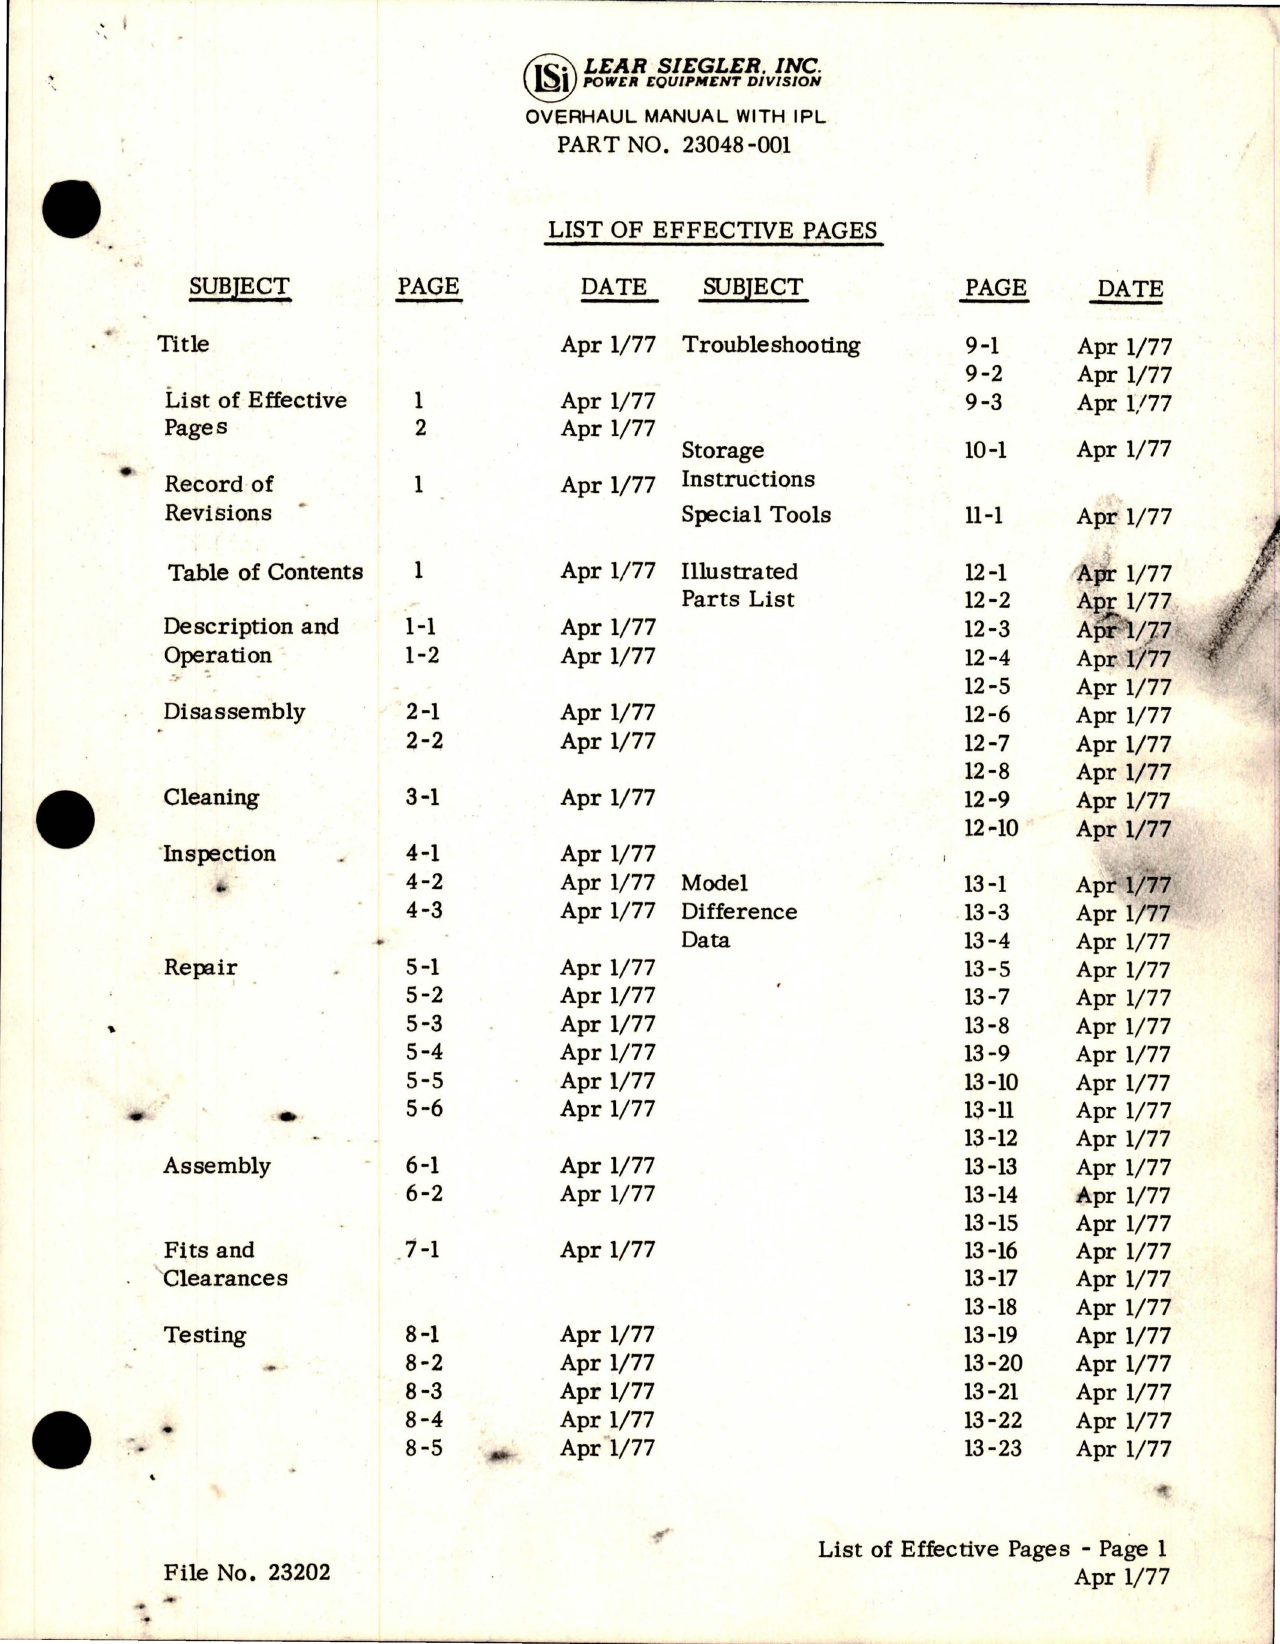 Sample page 7 from AirCorps Library document: Overhaul Manual with Parts List for DC Starter Generator 